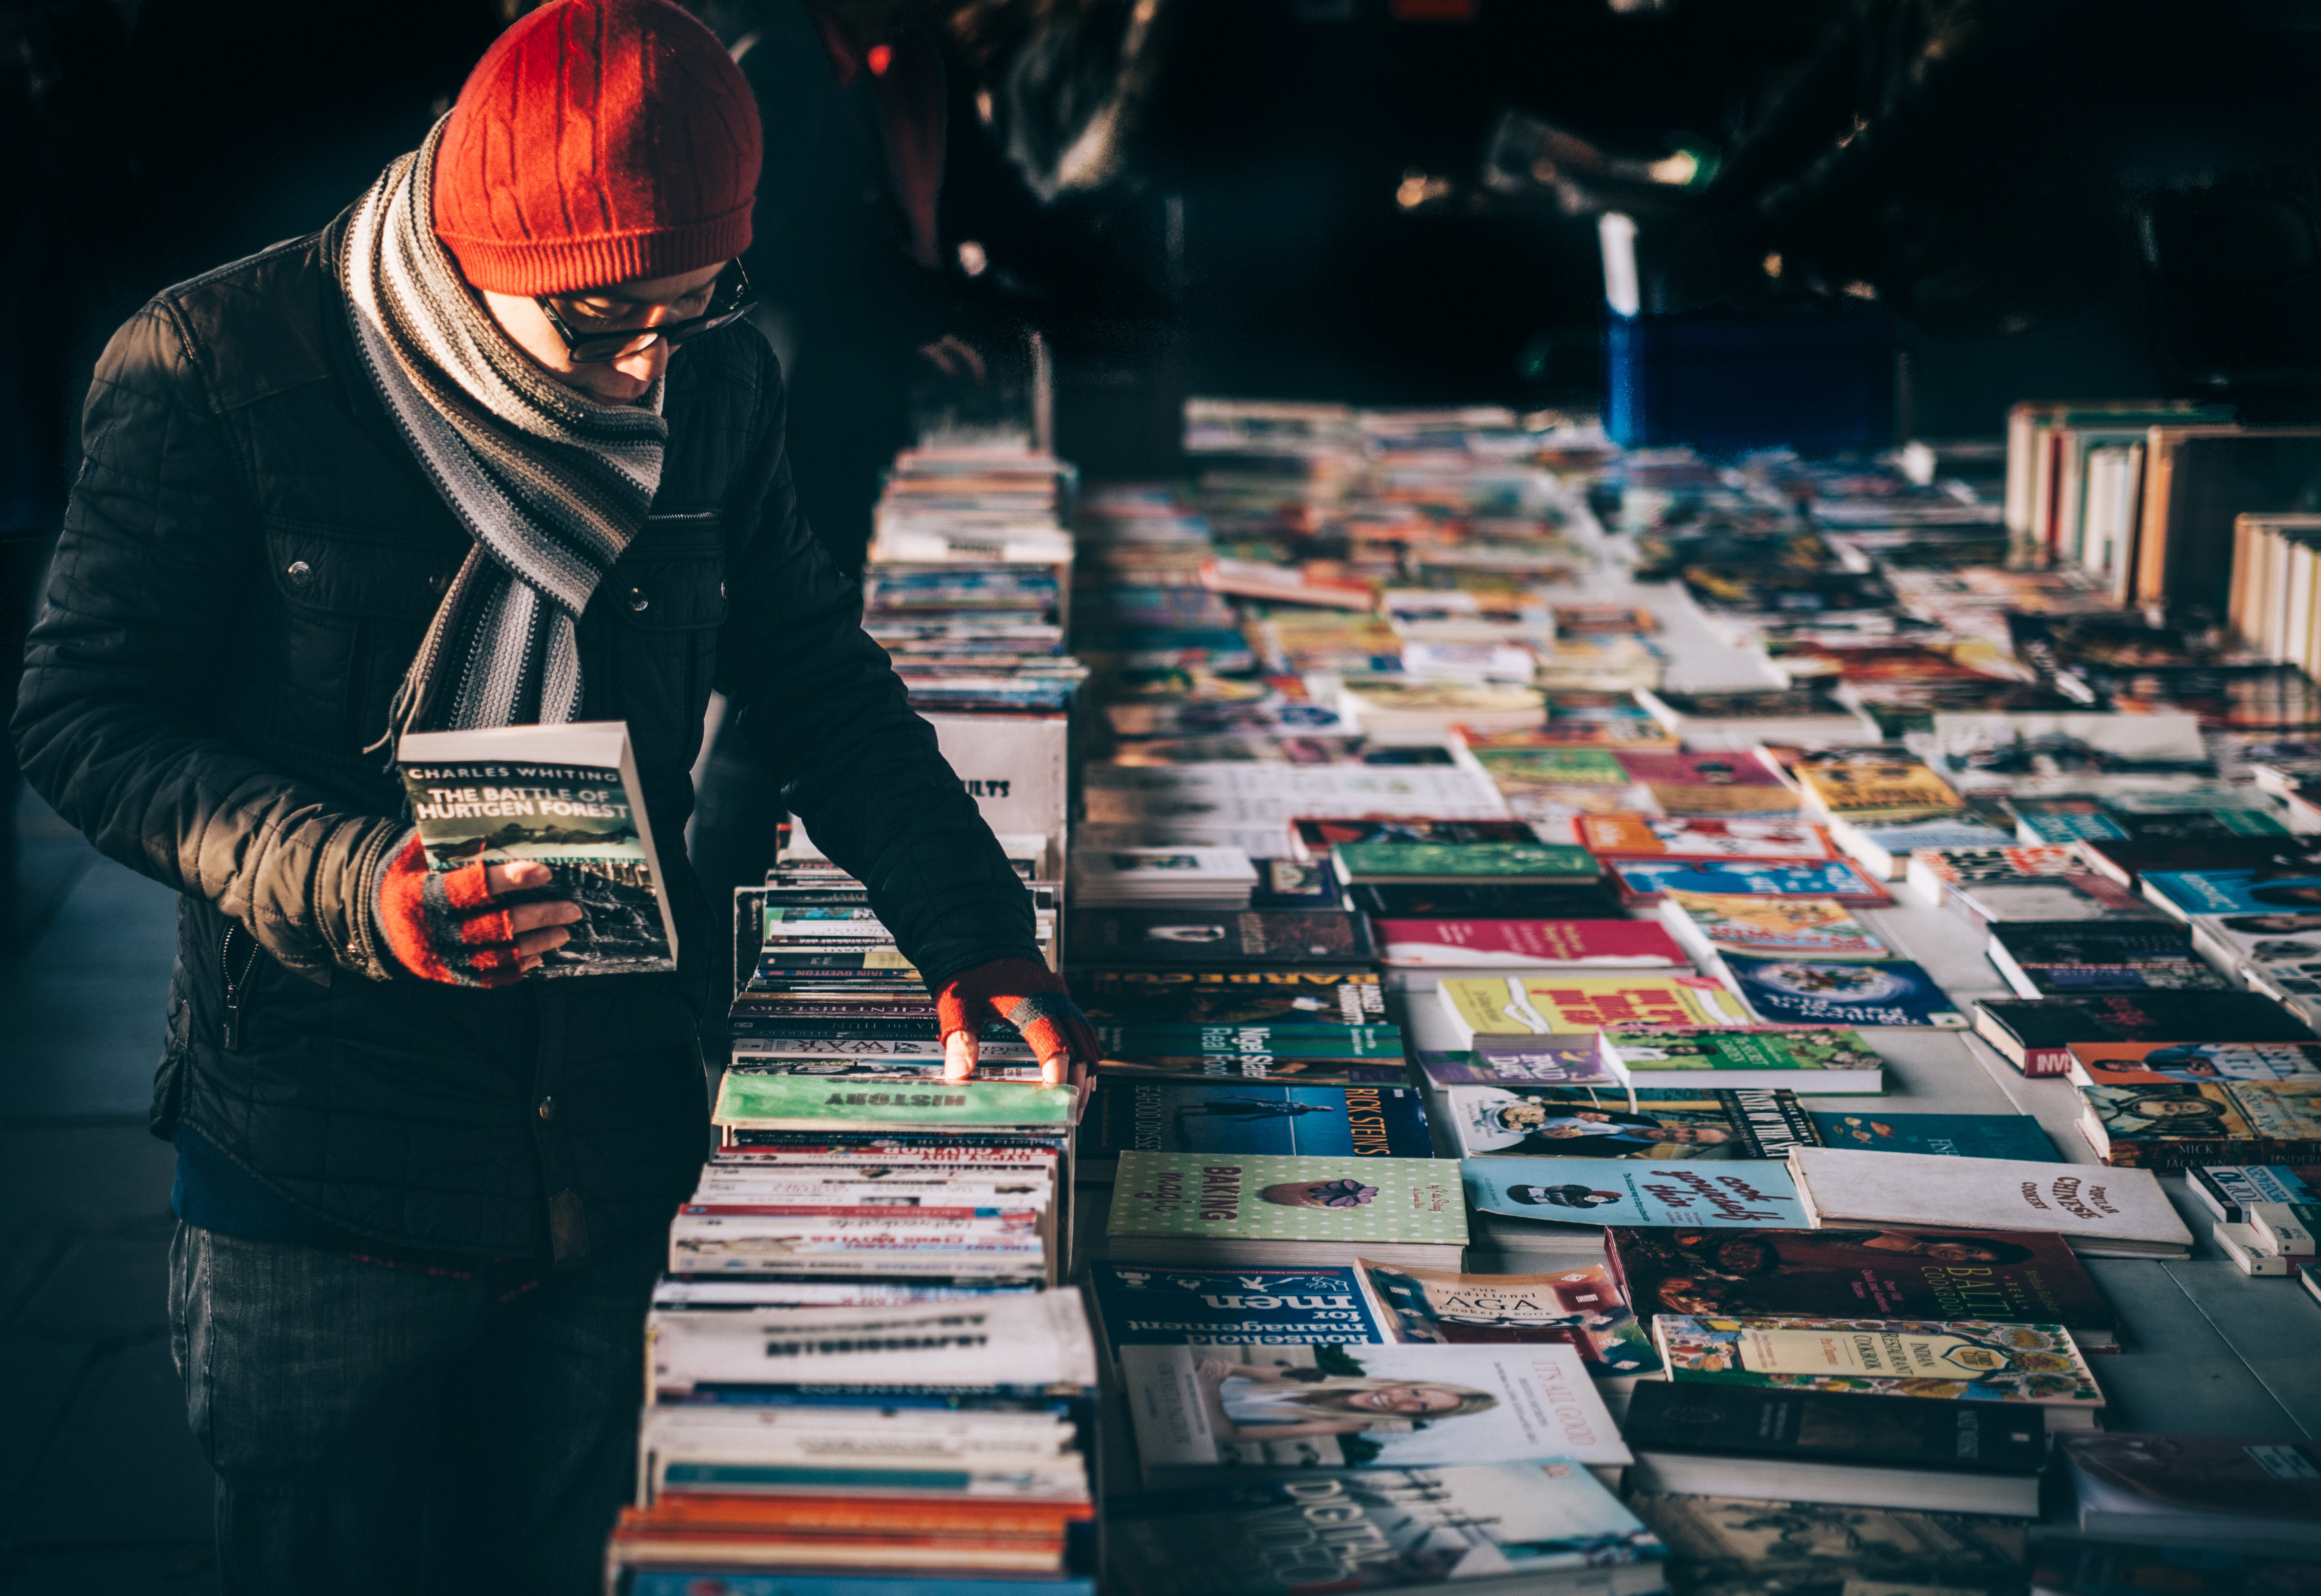 12 effortless marketing tips to consider for your book